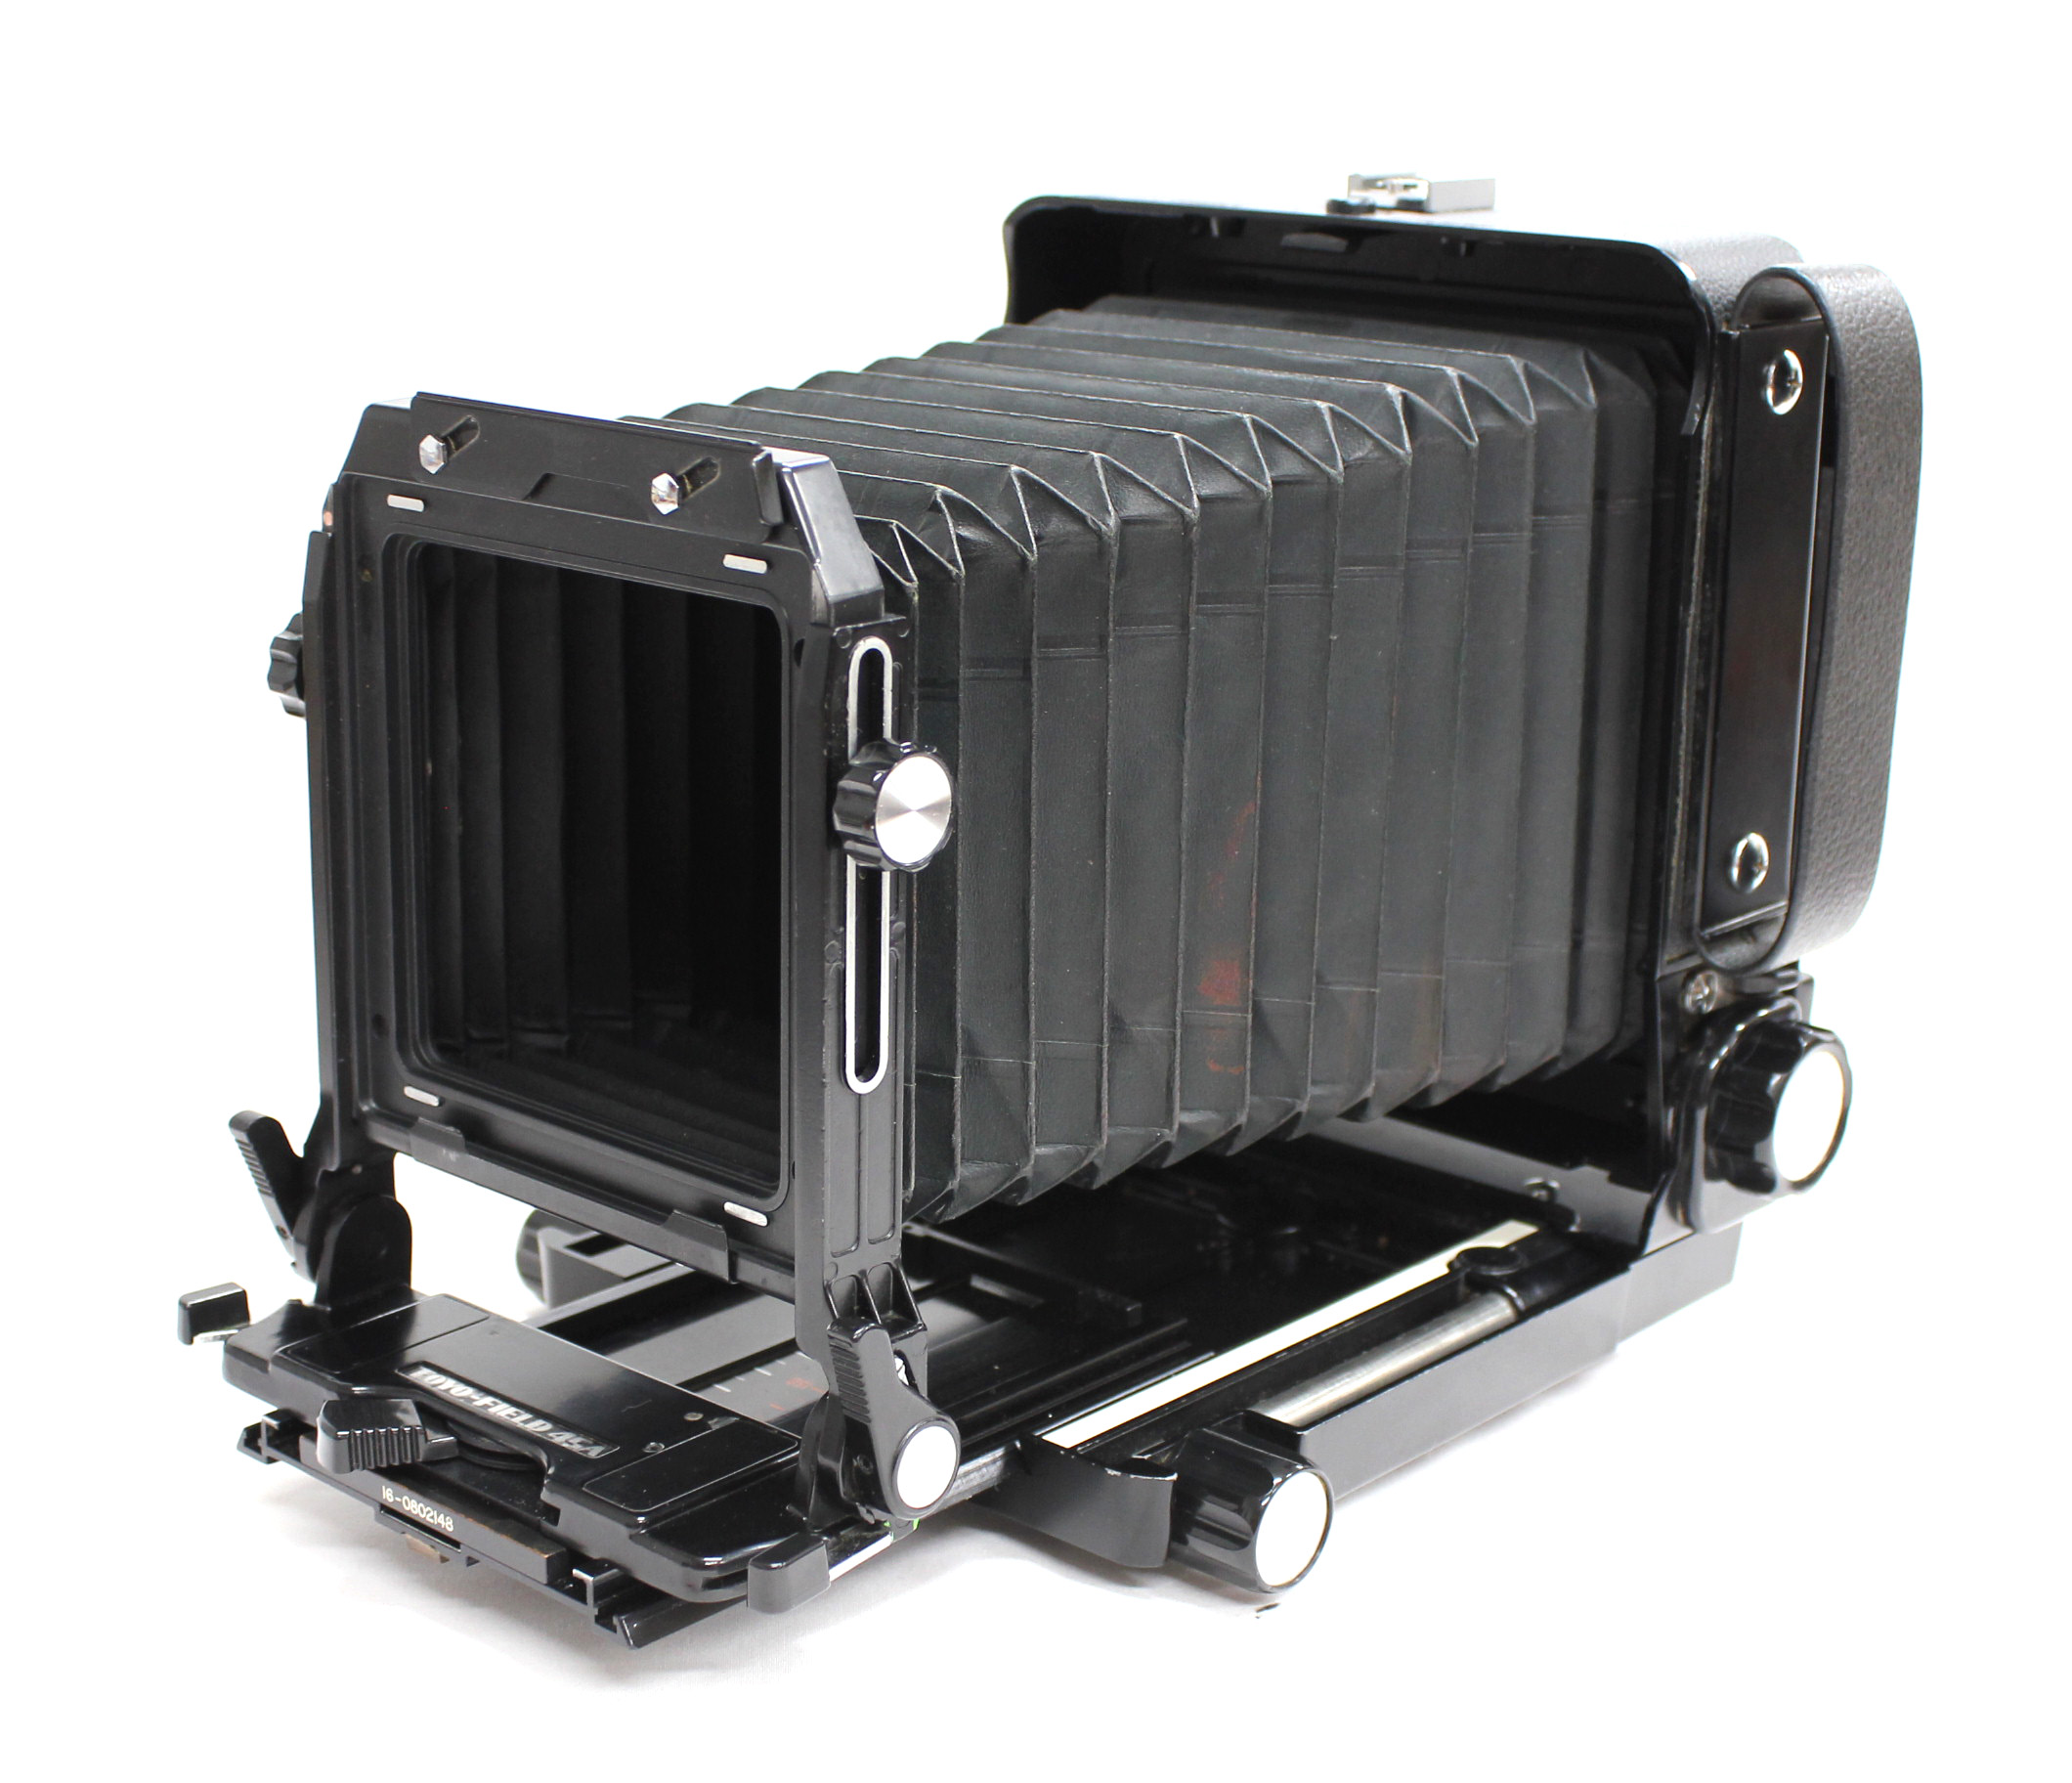 Japan Used Camera Shop | [Excellent+++++] Toyo Field 45A 4x5 Large Format Film Camera from Japan